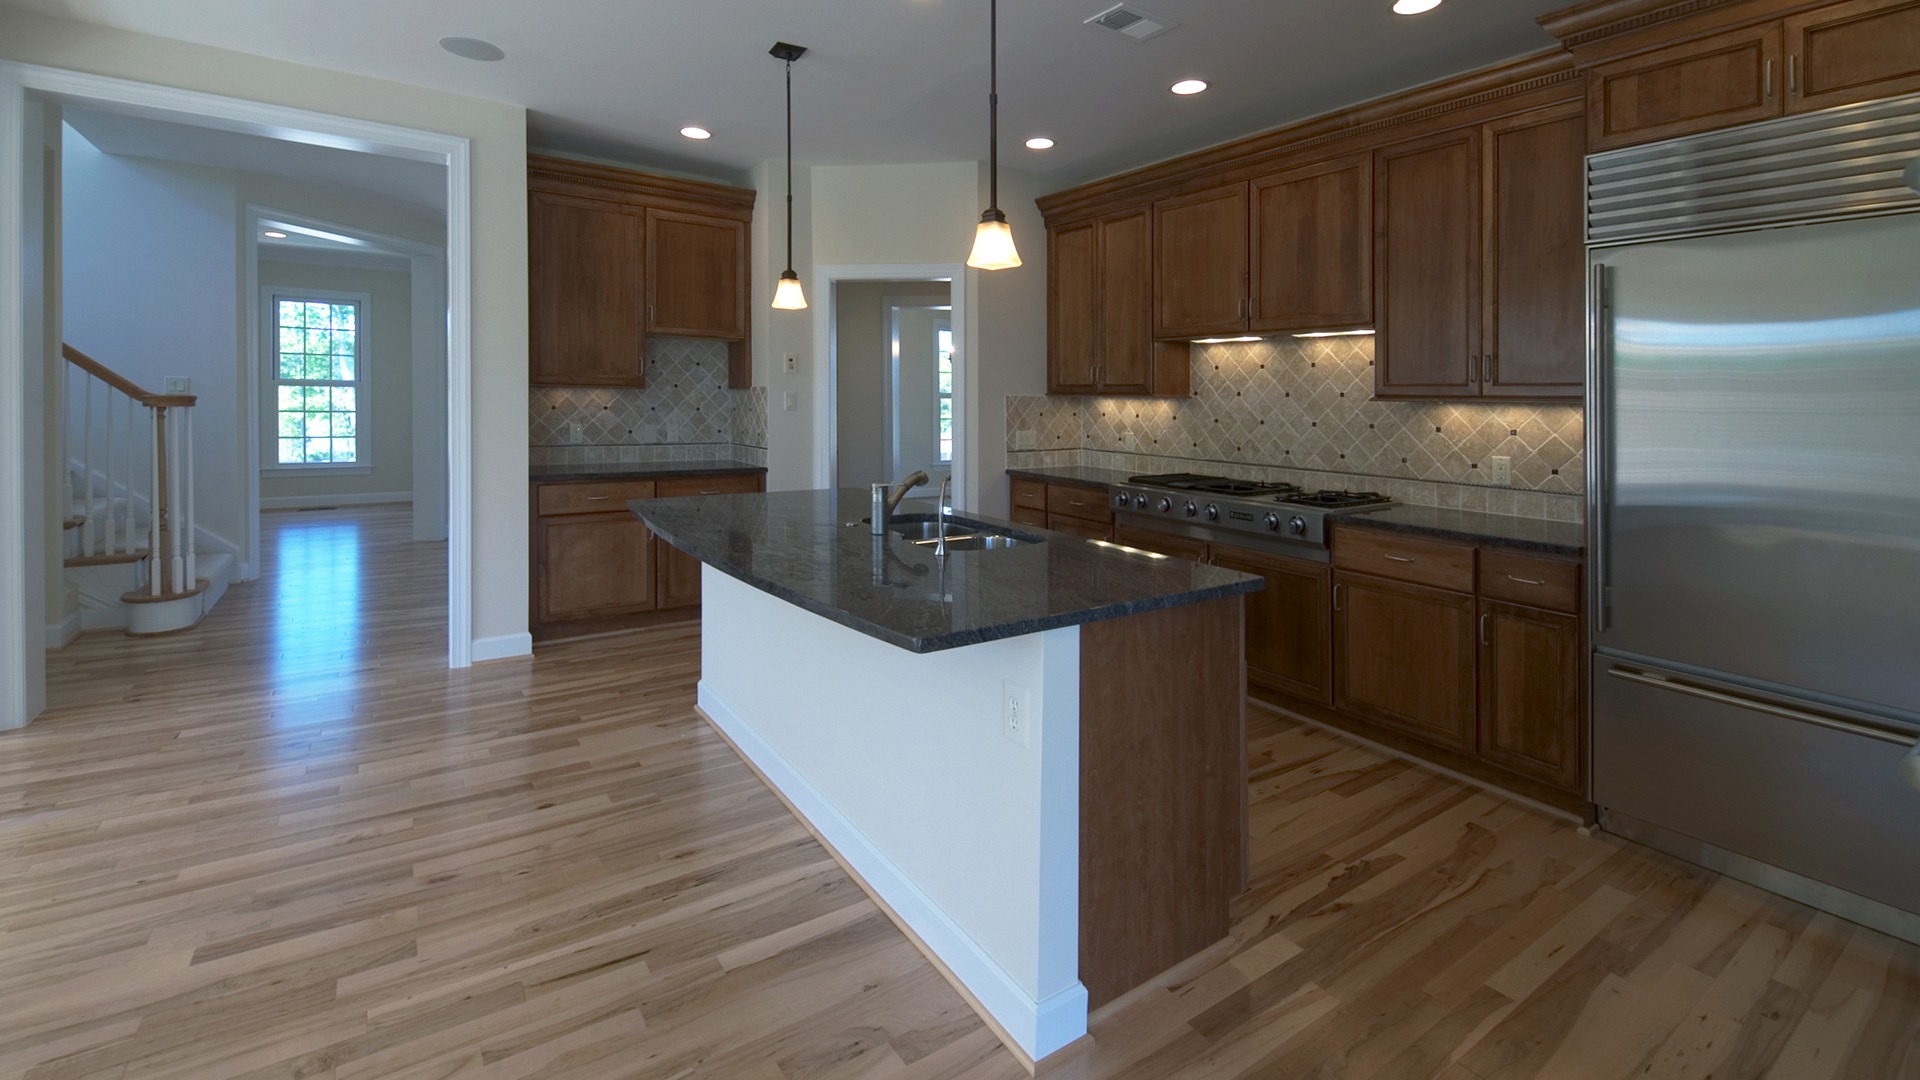 The Kitchen of the Brentwood model in Brambleton. Some options shown.